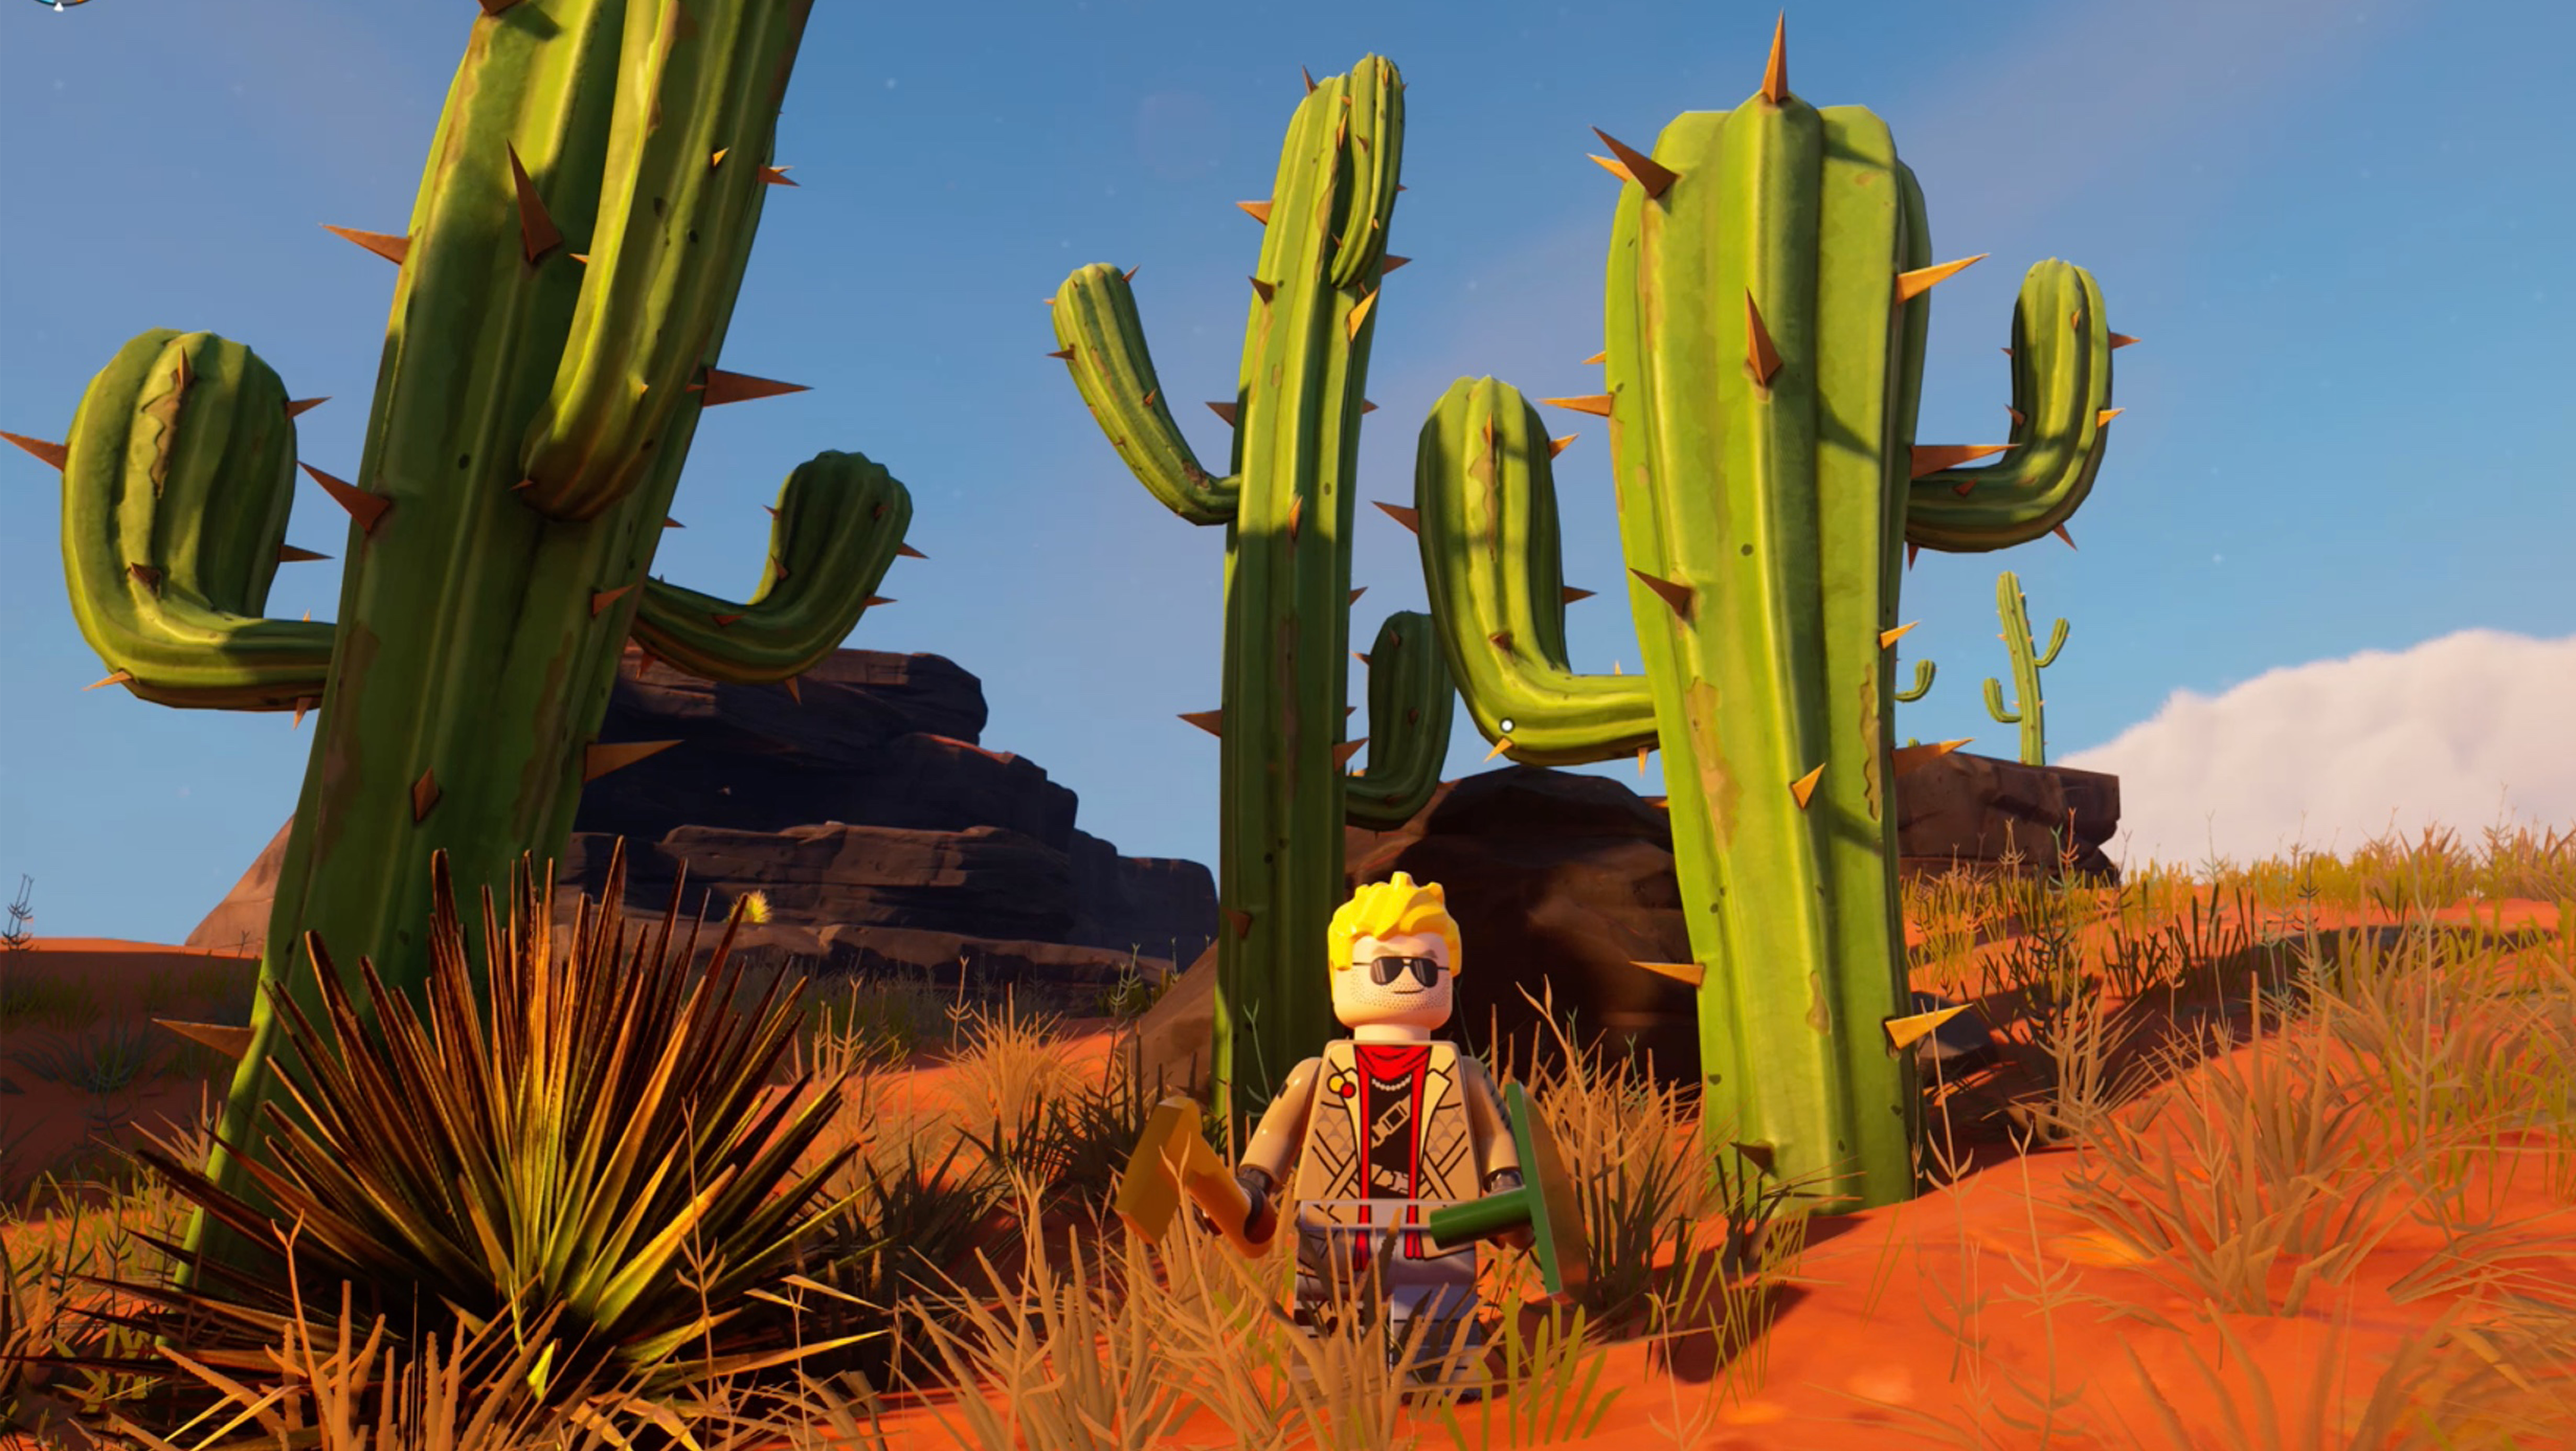 Lego Fortnite&nbsp;character standing in front of some cactuses in the desert Dry Valley biome